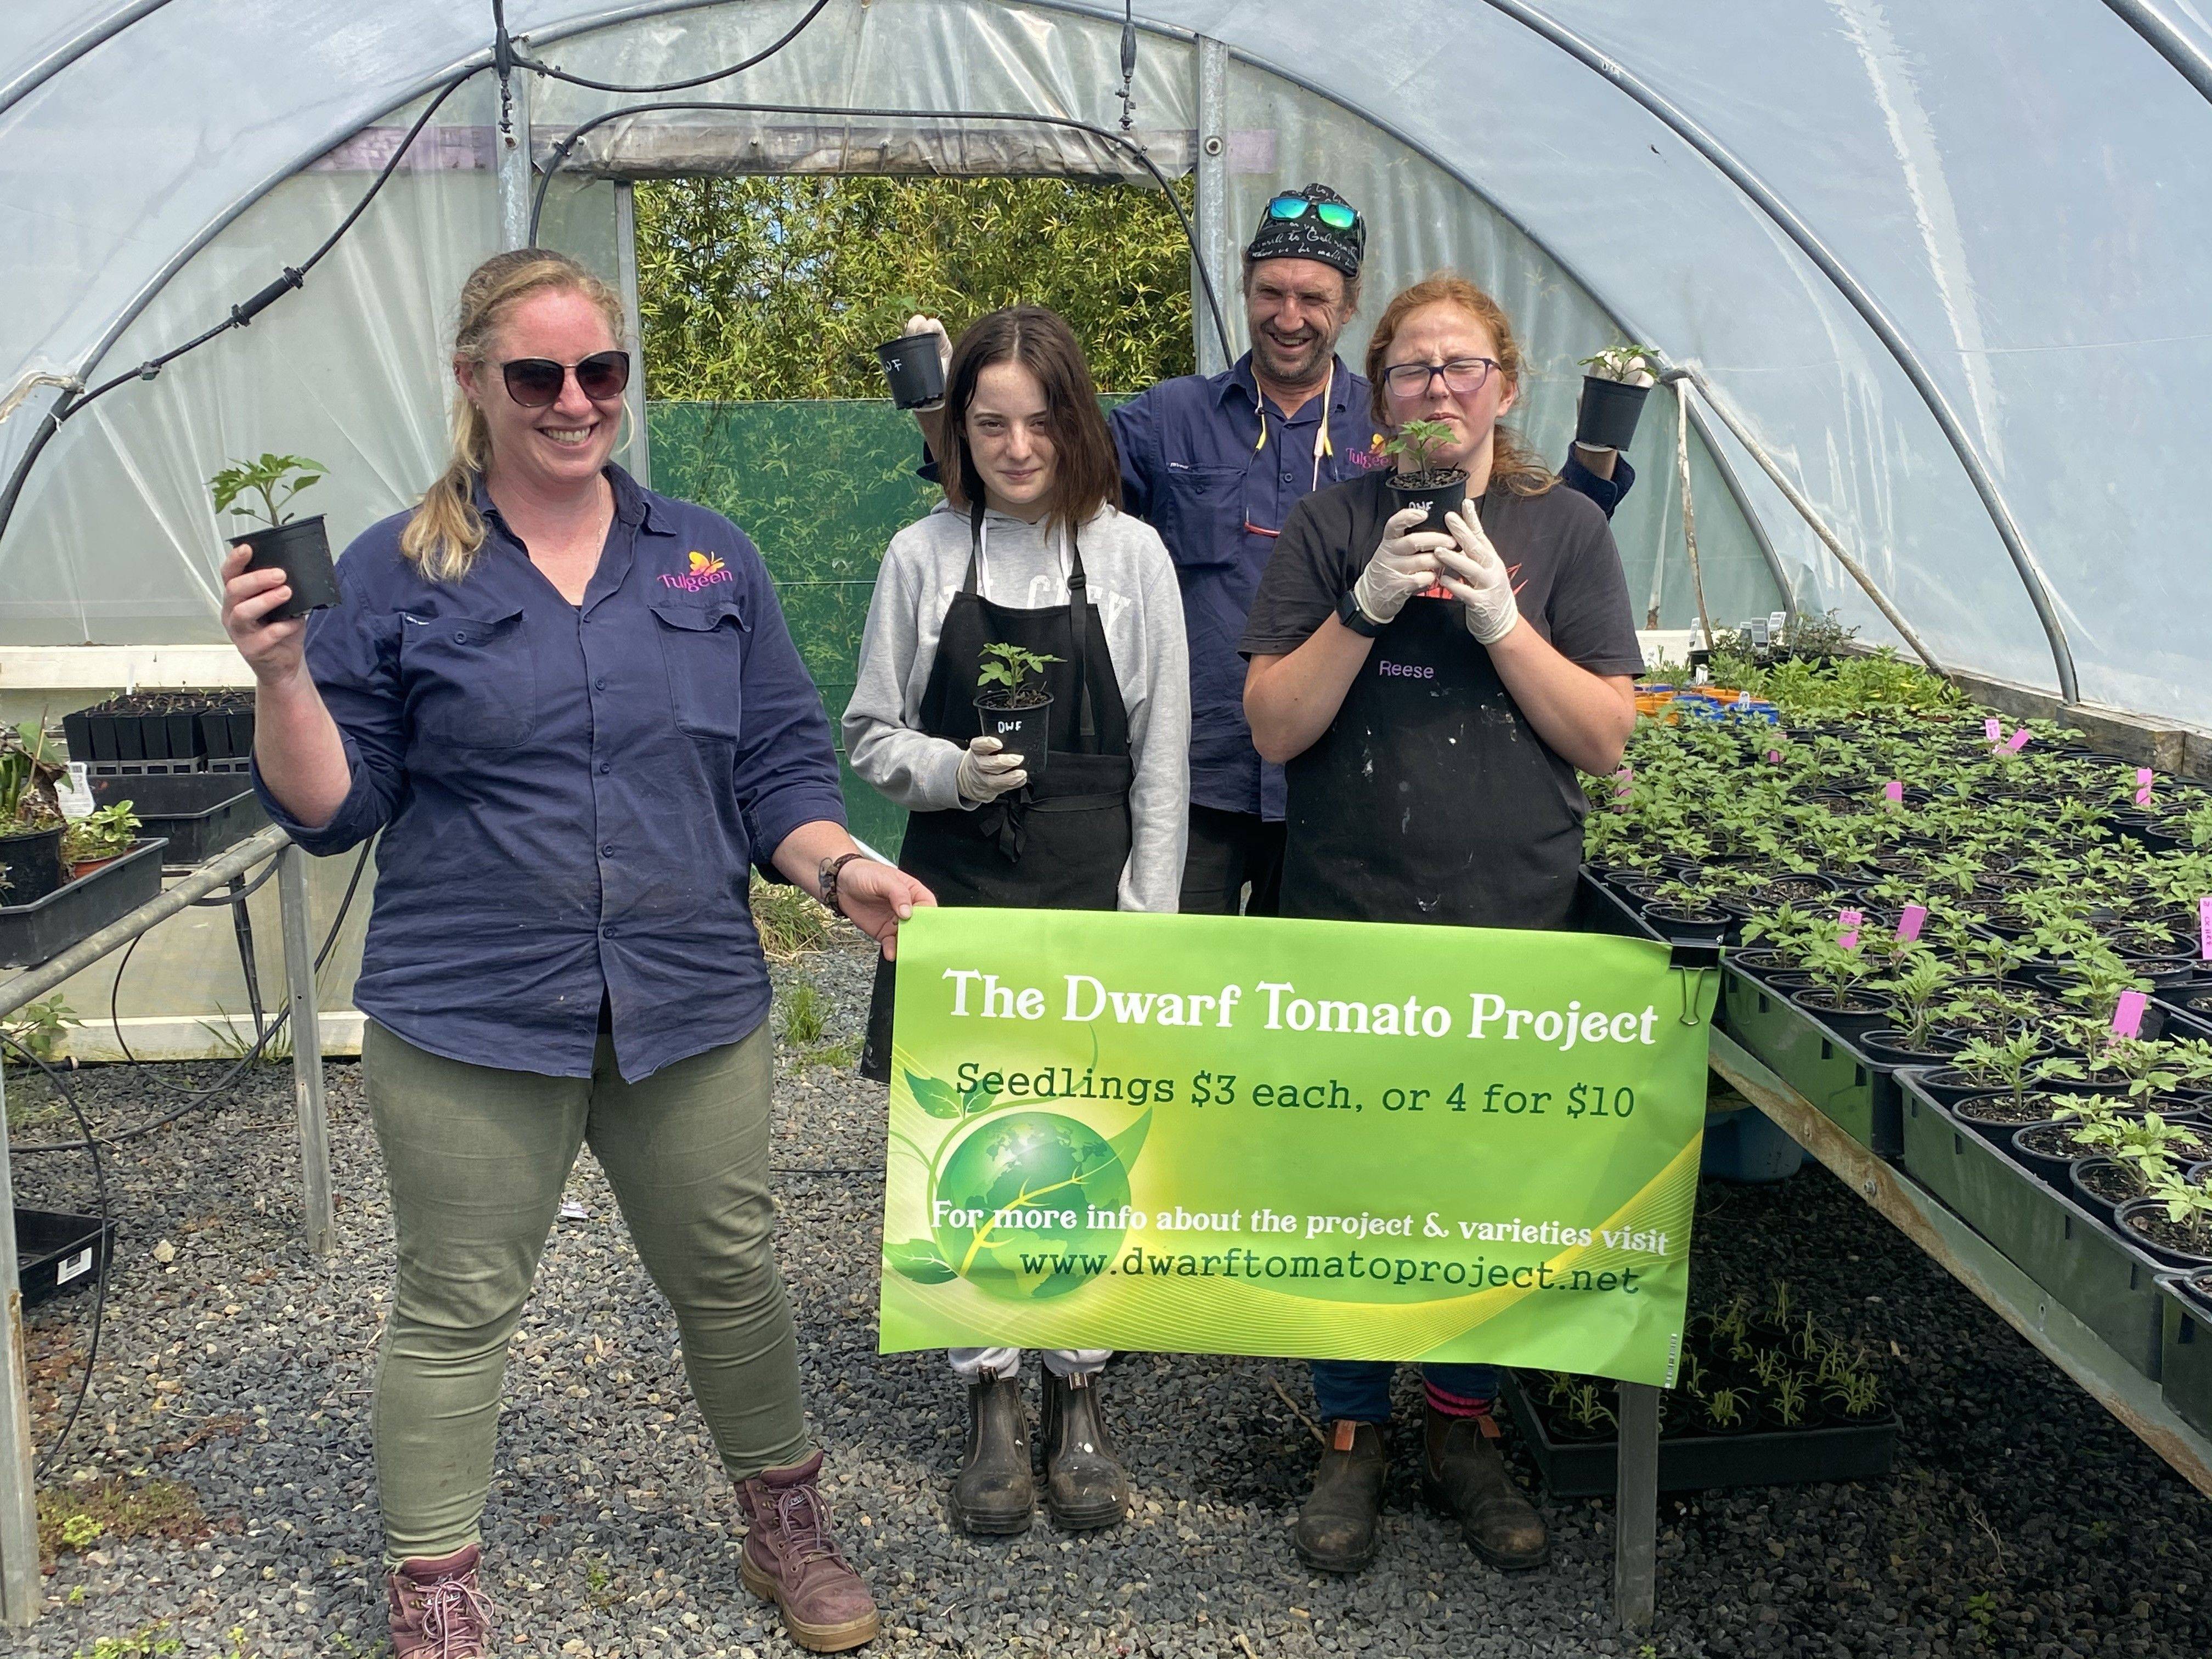 The Dwarf Tomato Project propagates seedlings for sale at Tulgeen's Riverside Nursery